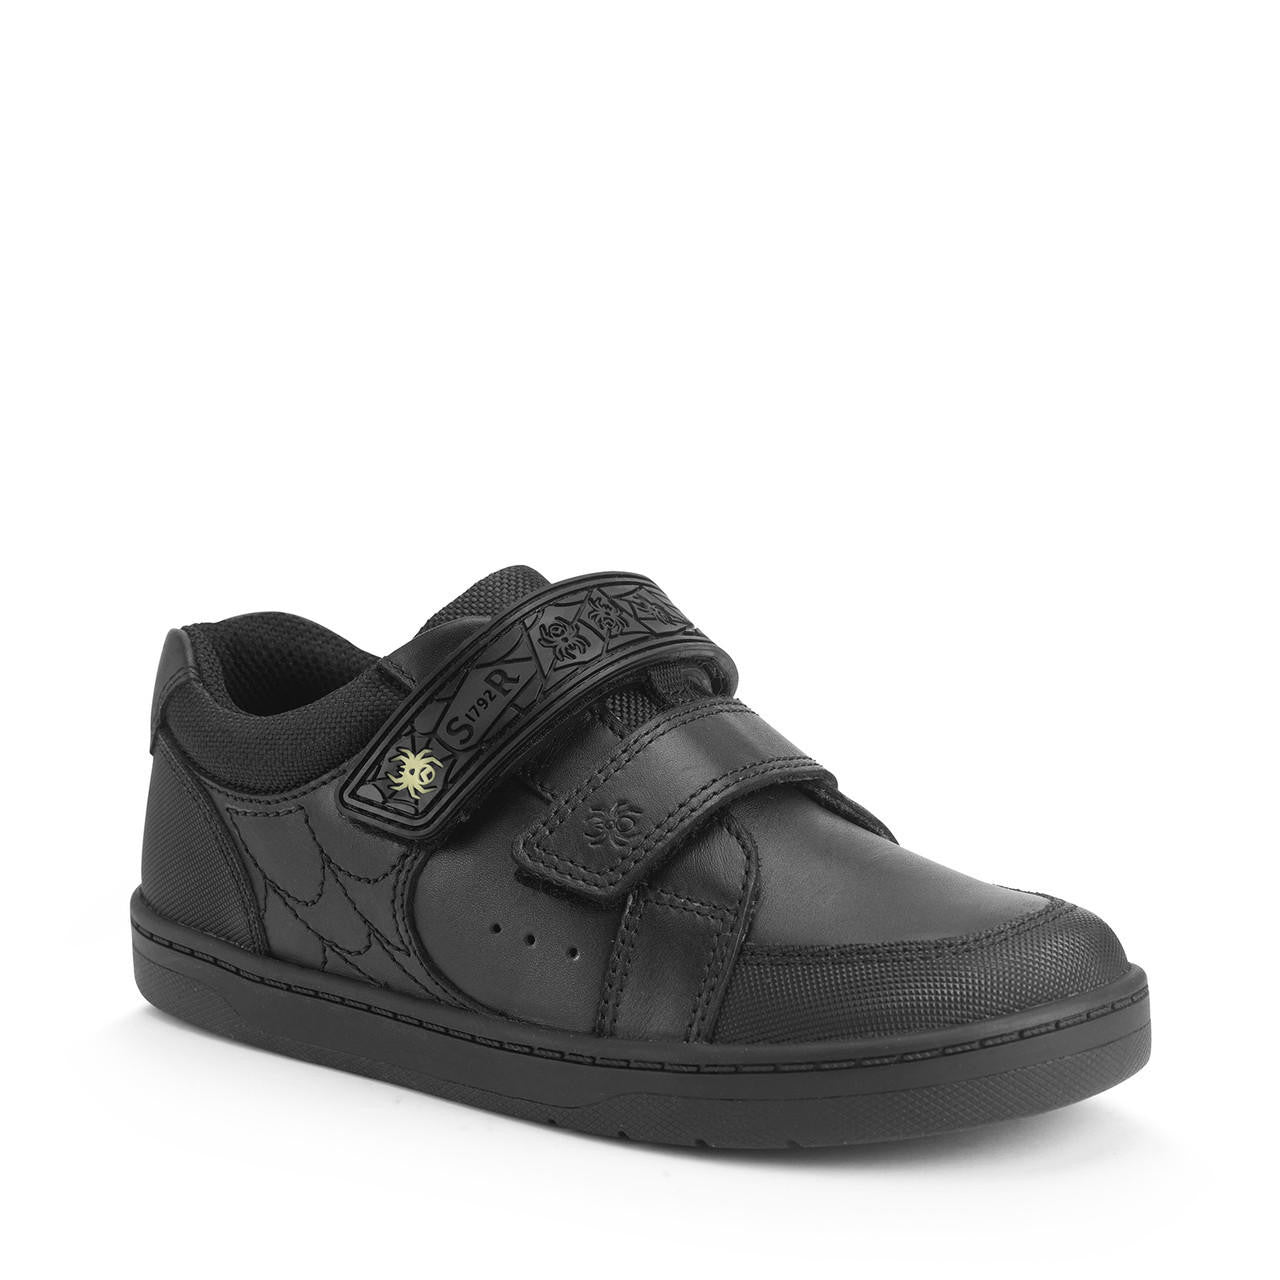 A boys school shoe by Start-Rite, style Spider Web, in black leather with toe bumper and spider motif. Angled view.